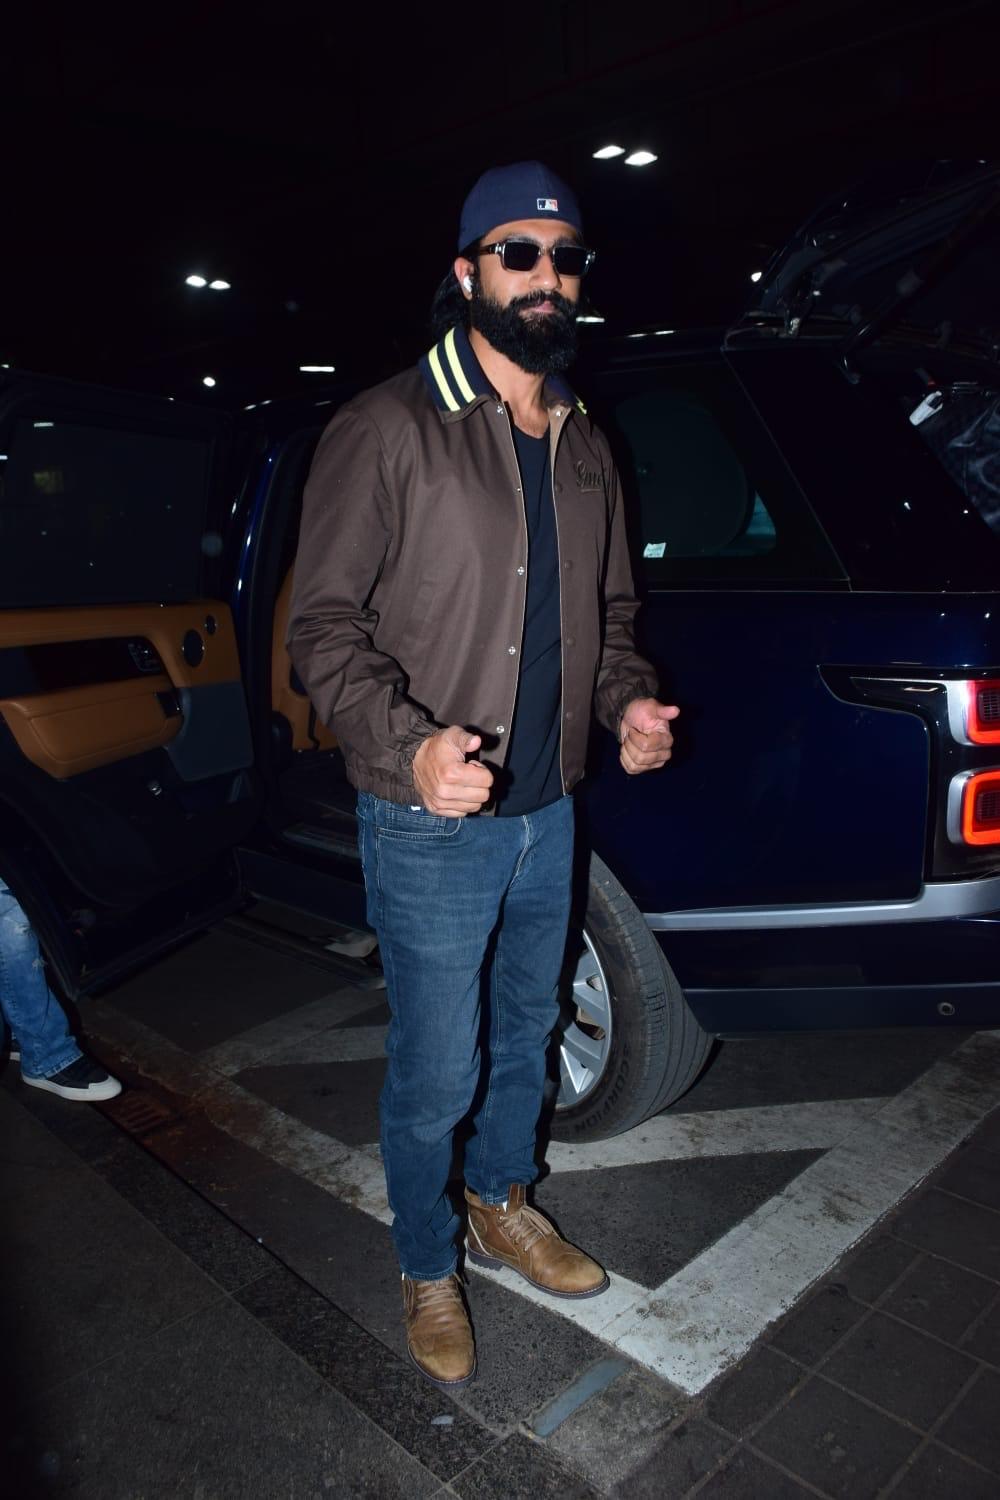 Vicky Kaushal was clicked at the Mumbai airport today